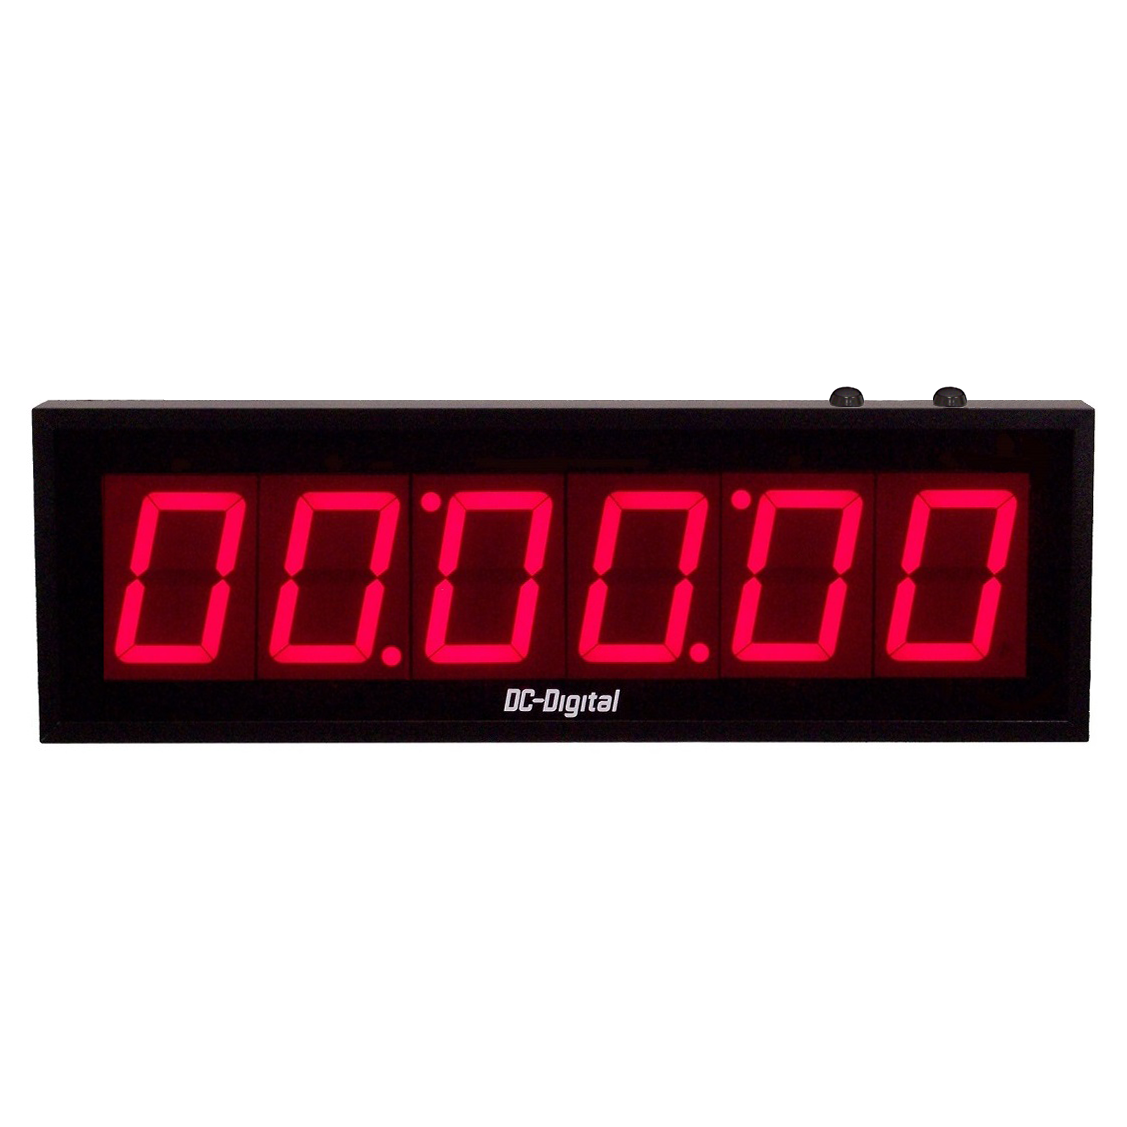 (DC-406T-UP) 4.0 Inch LED Digital, Push-Button Controlled, Count Up Timer, Hours, Minutes, Seconds